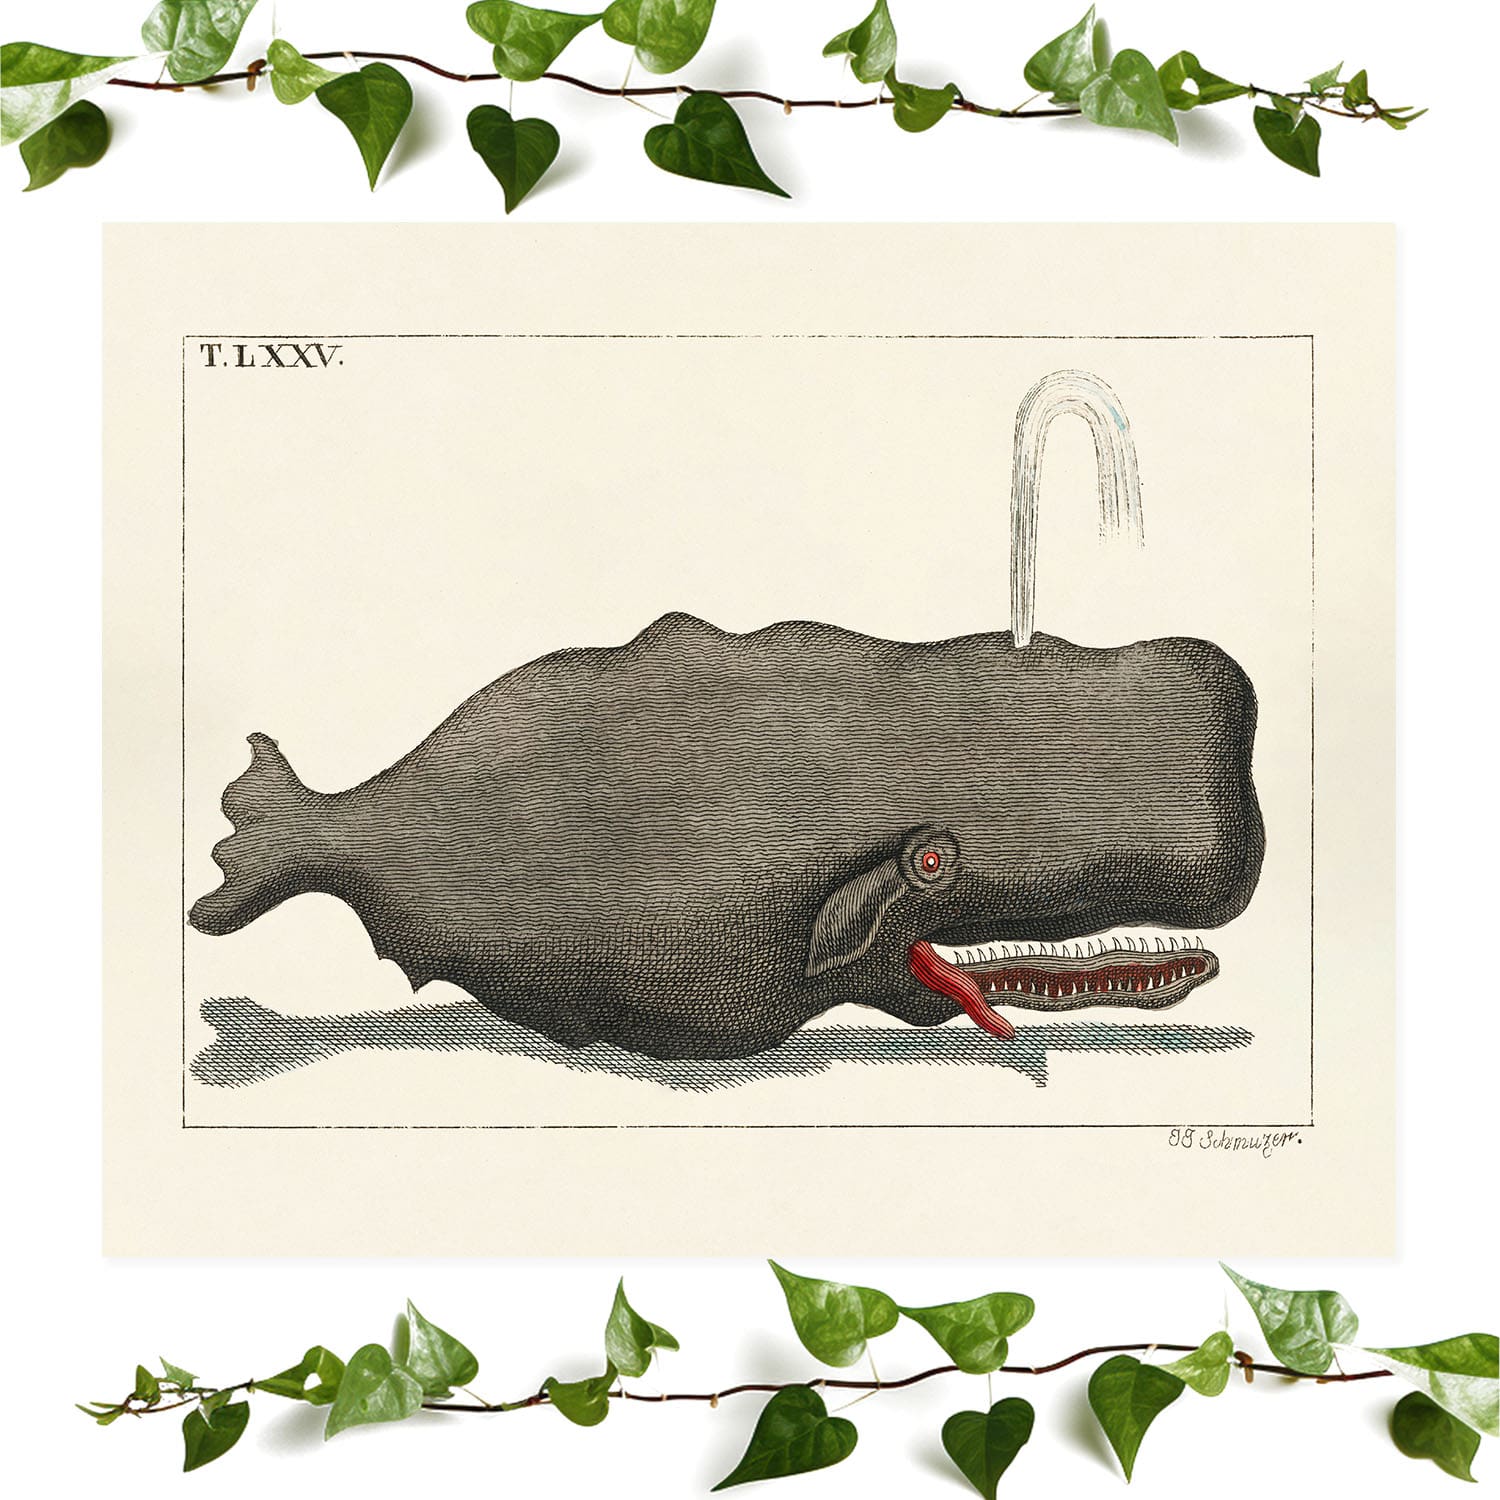 Funny Whale art prints featuring a crazy gray wale, vintage wall art room decor